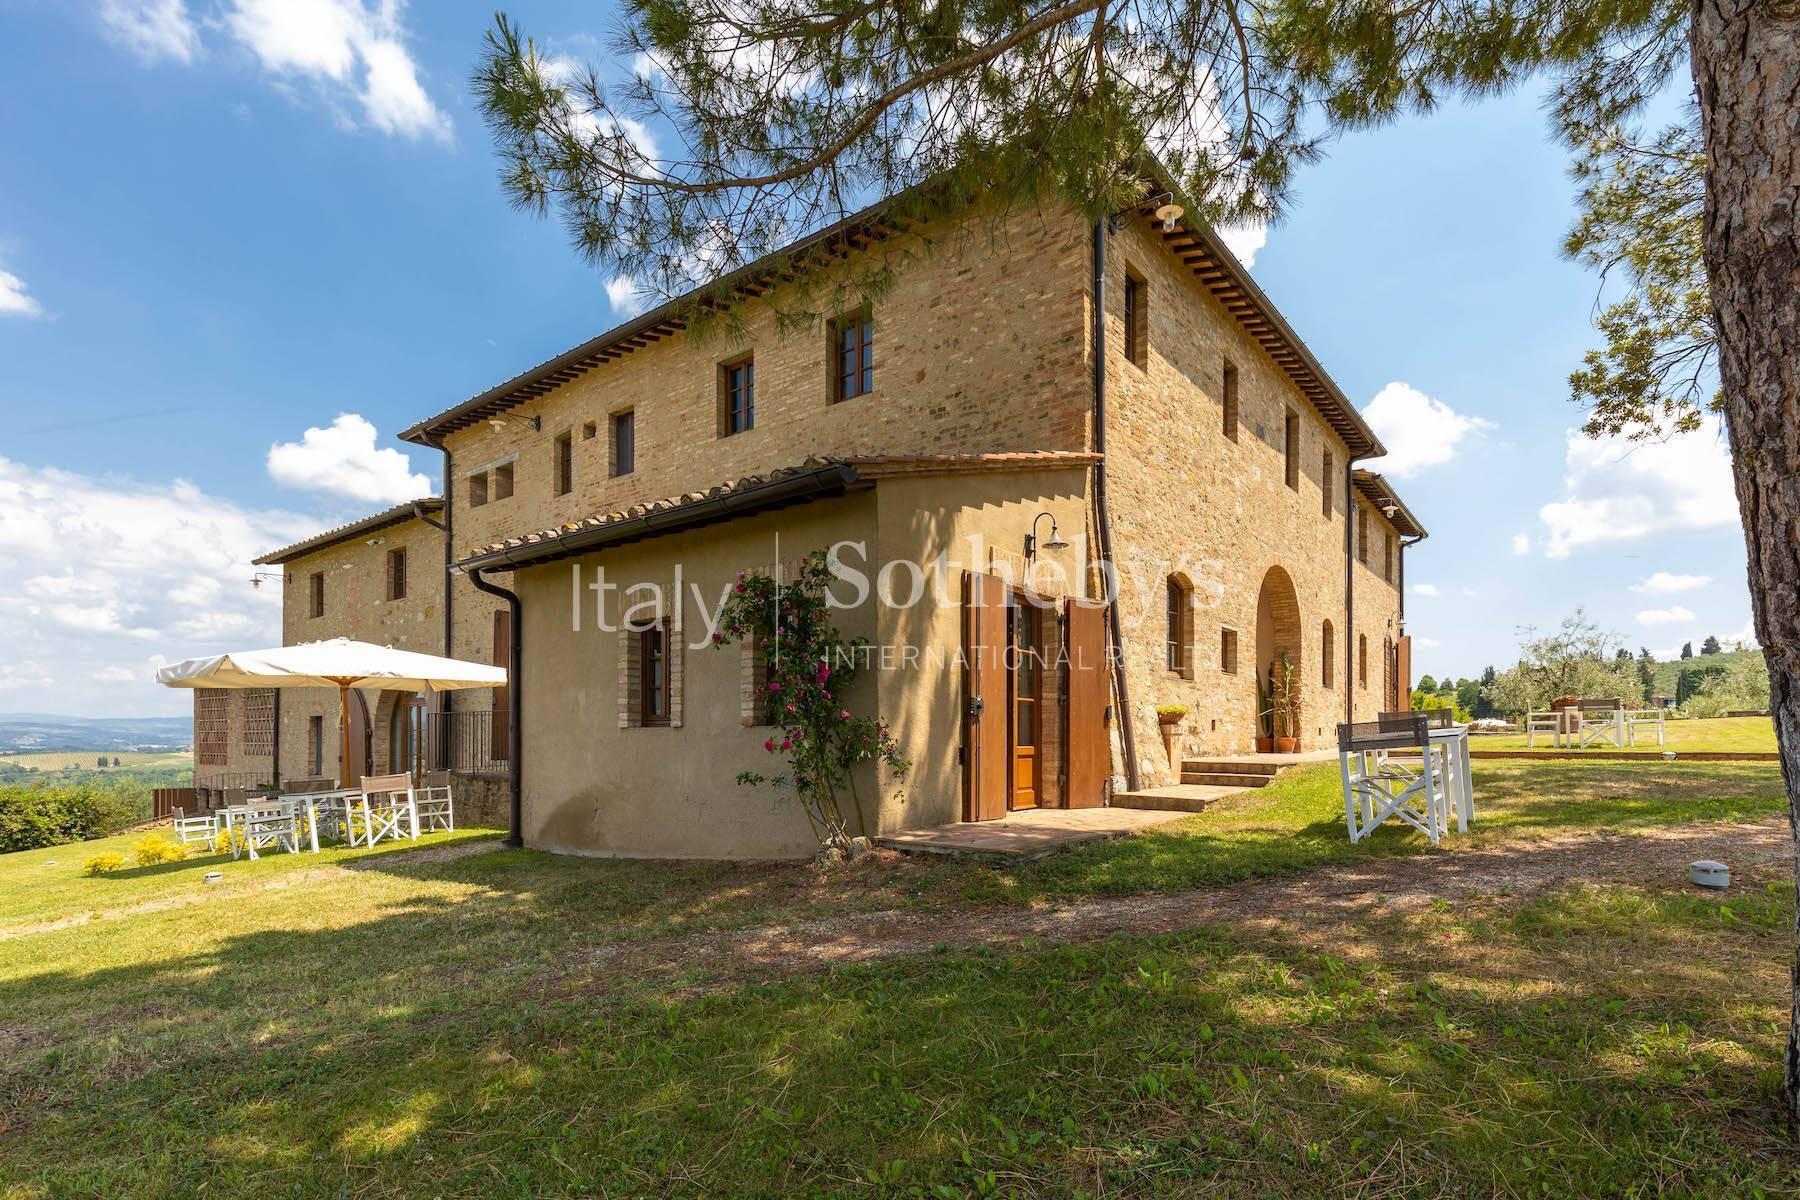 Winery with ancient country house in San gimignano - 30